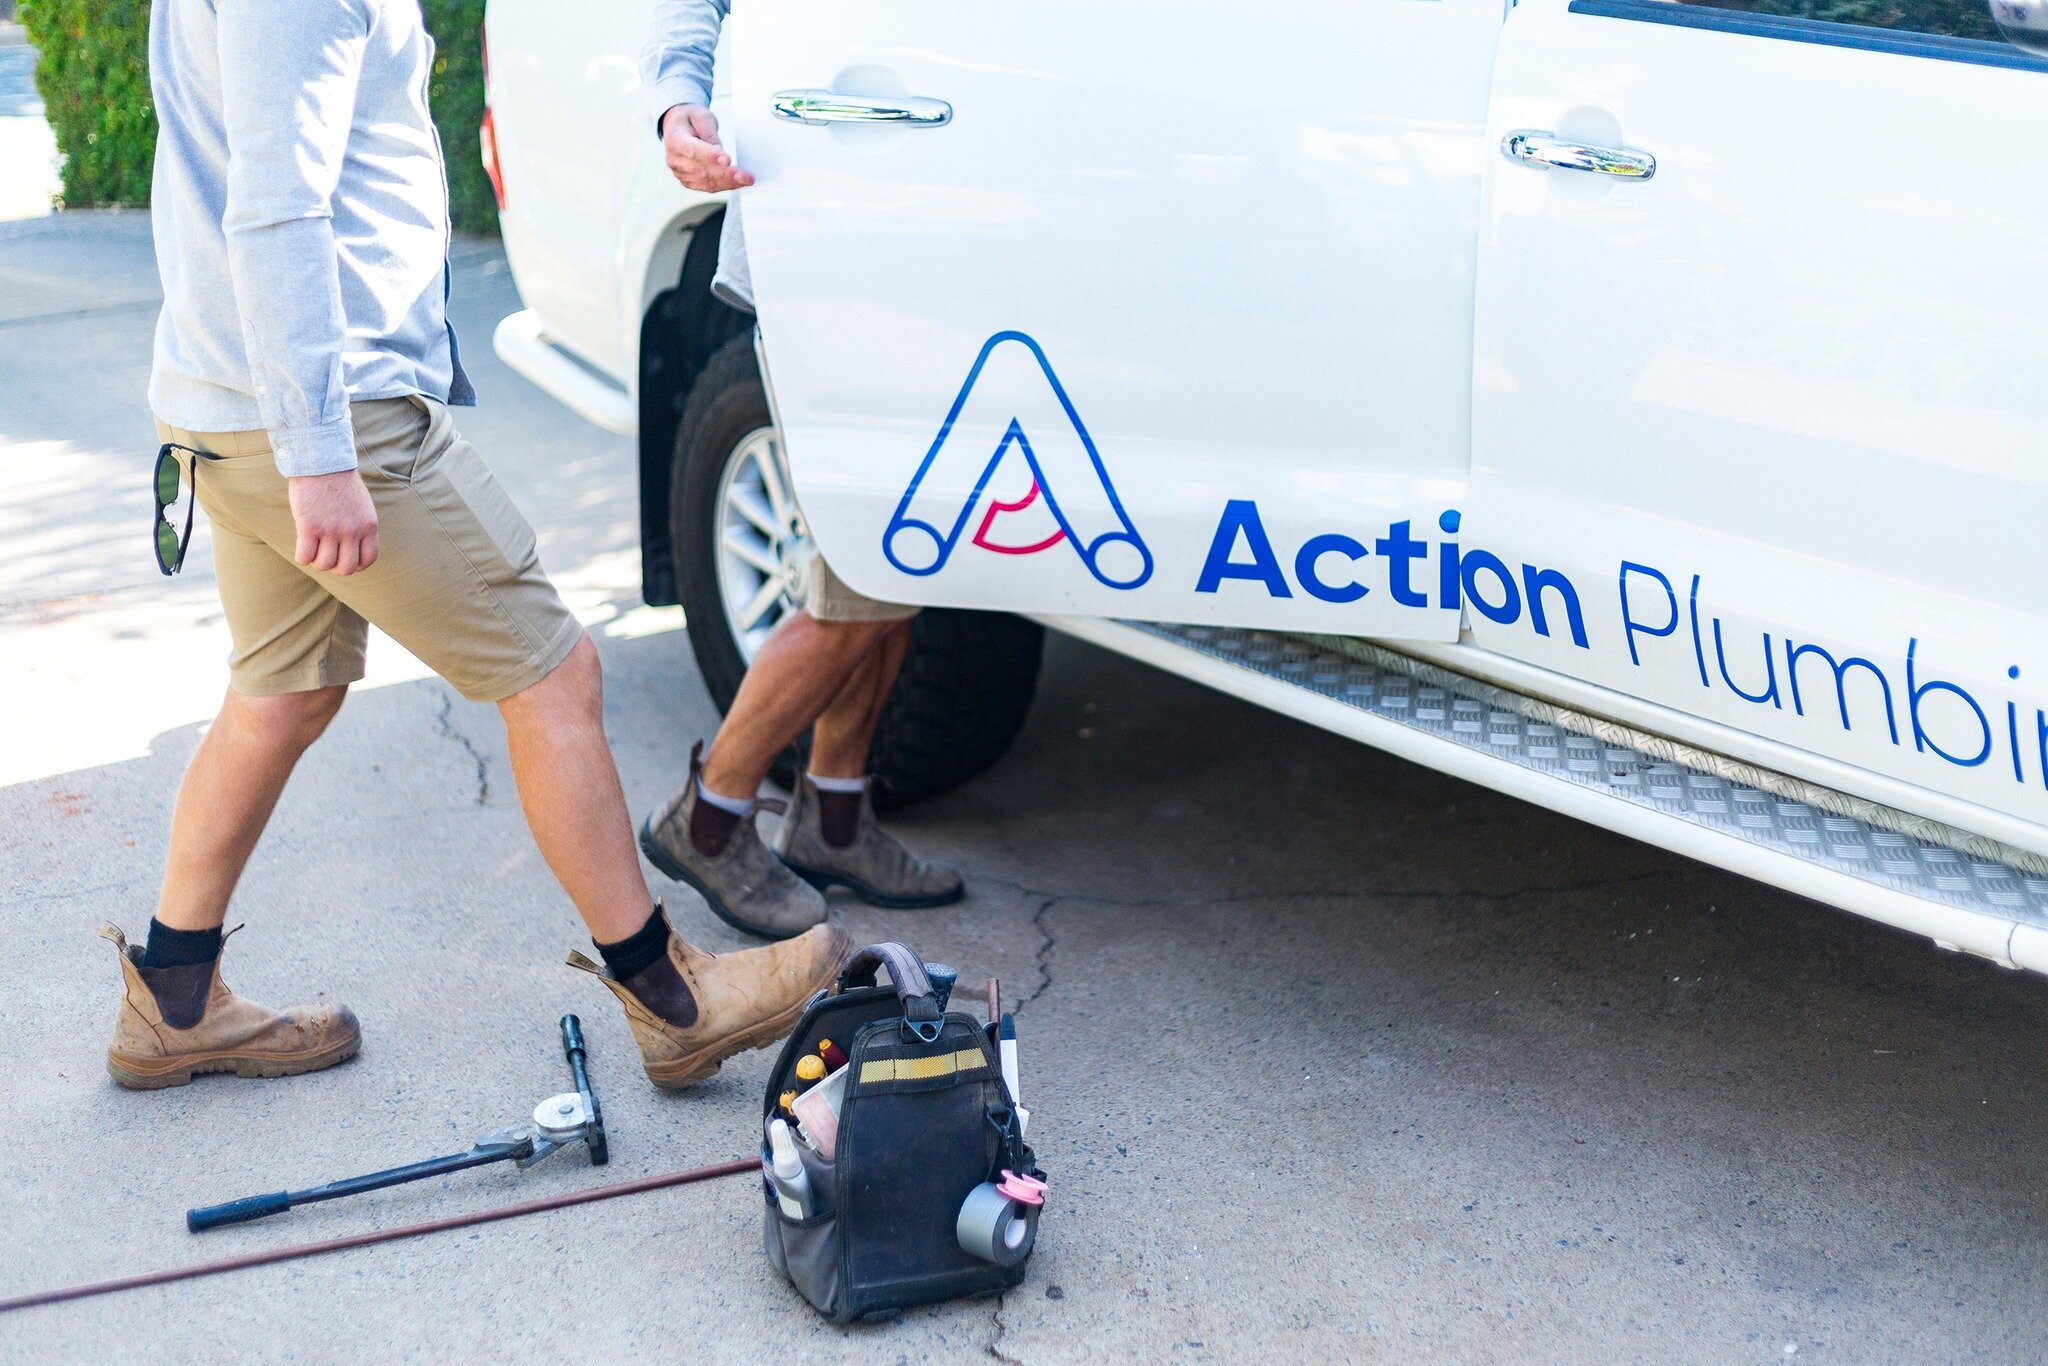 If you have urgent plumbing, gas, stormwater or roofing needs, don't delay any longer! Action Plumbing is your solution. Our clients value our friendly and clear communication and our quick response time. 

Give us a call today on 0438 630 508.

#Act